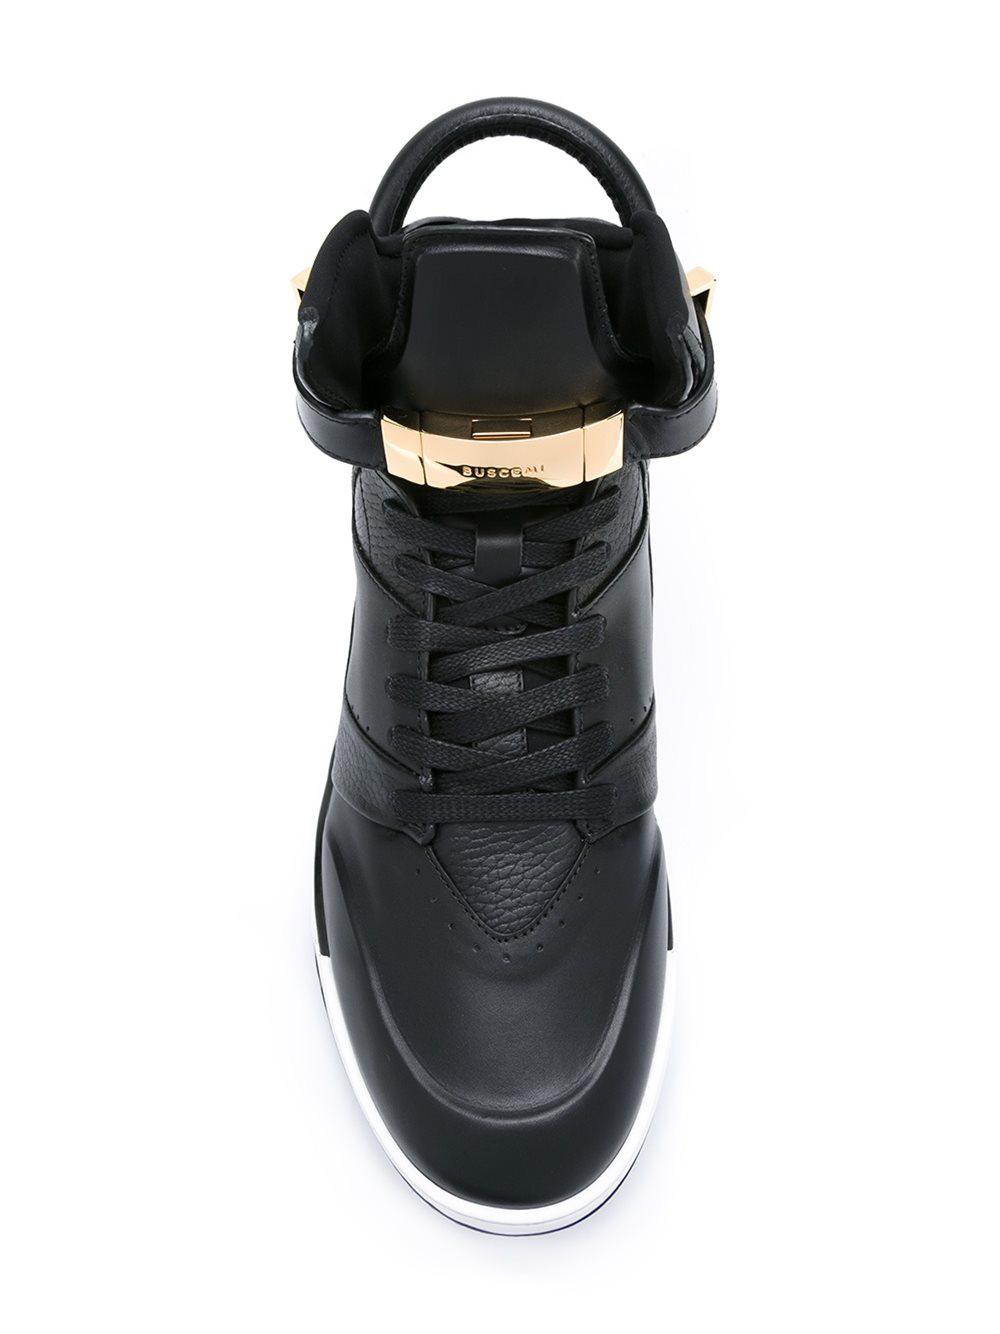 Buscemi Leather Sneakers w/ Tags - Black Sneakers, Shoes - BSI23349